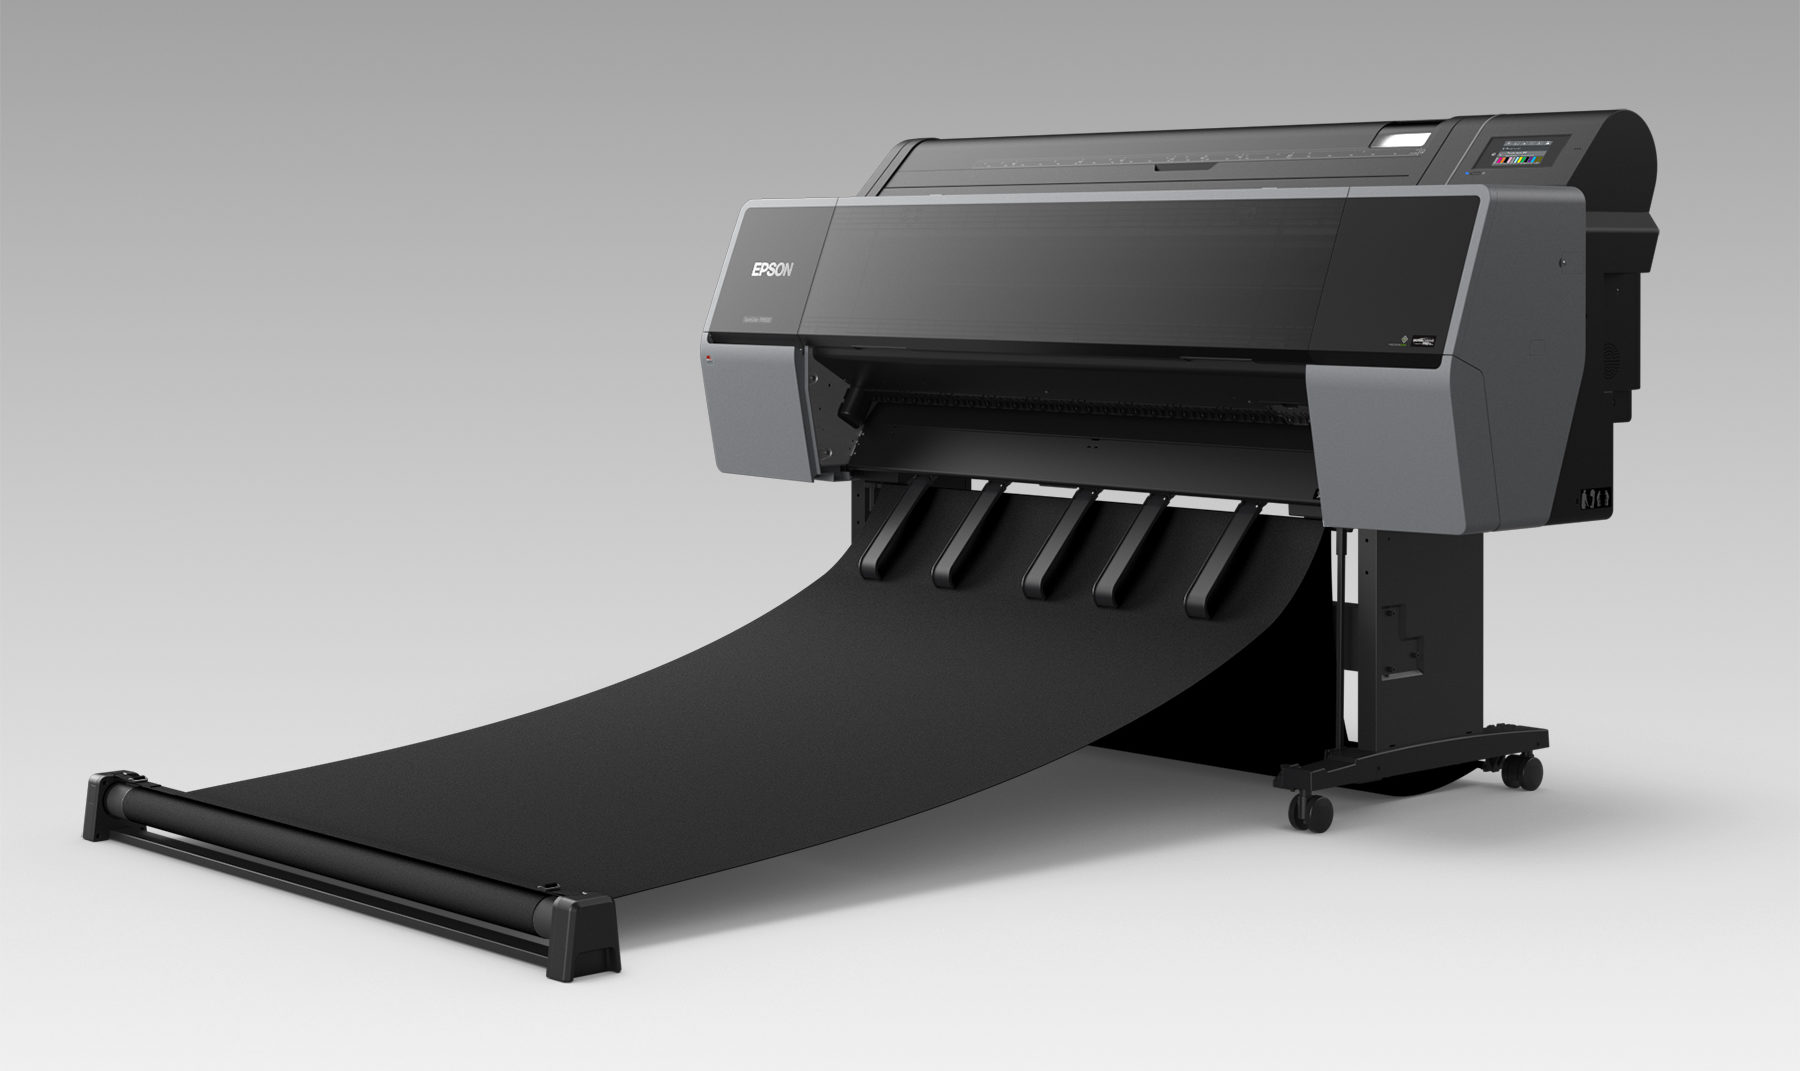 Game Changer! The NEW Epson P7570/9570